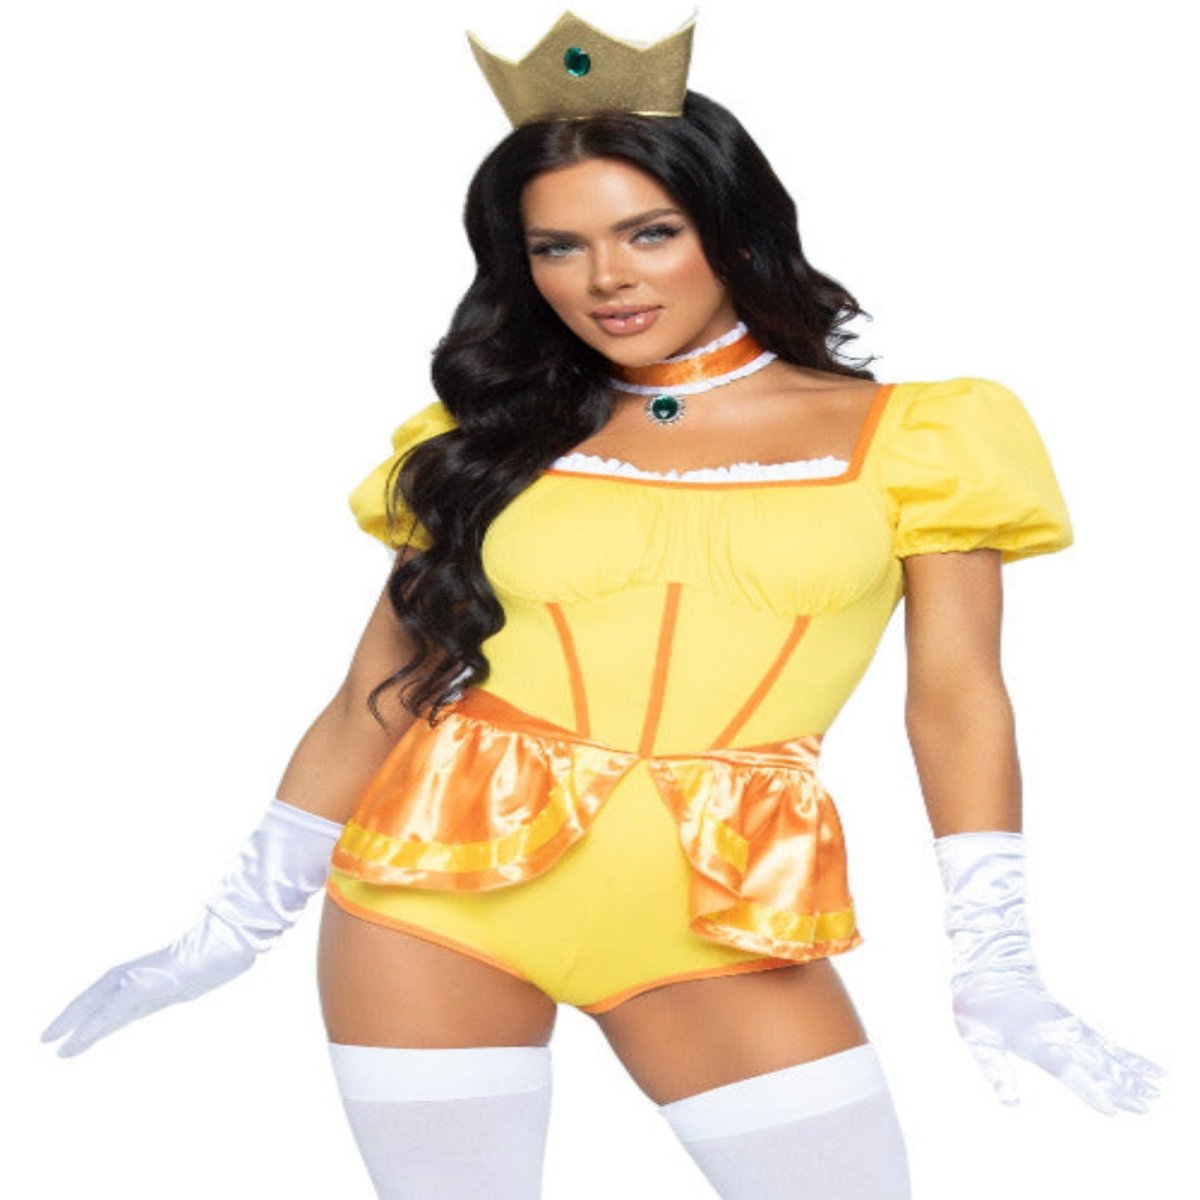 Sexy Sunflower Princess Costume With Crown - worldclasscostumes